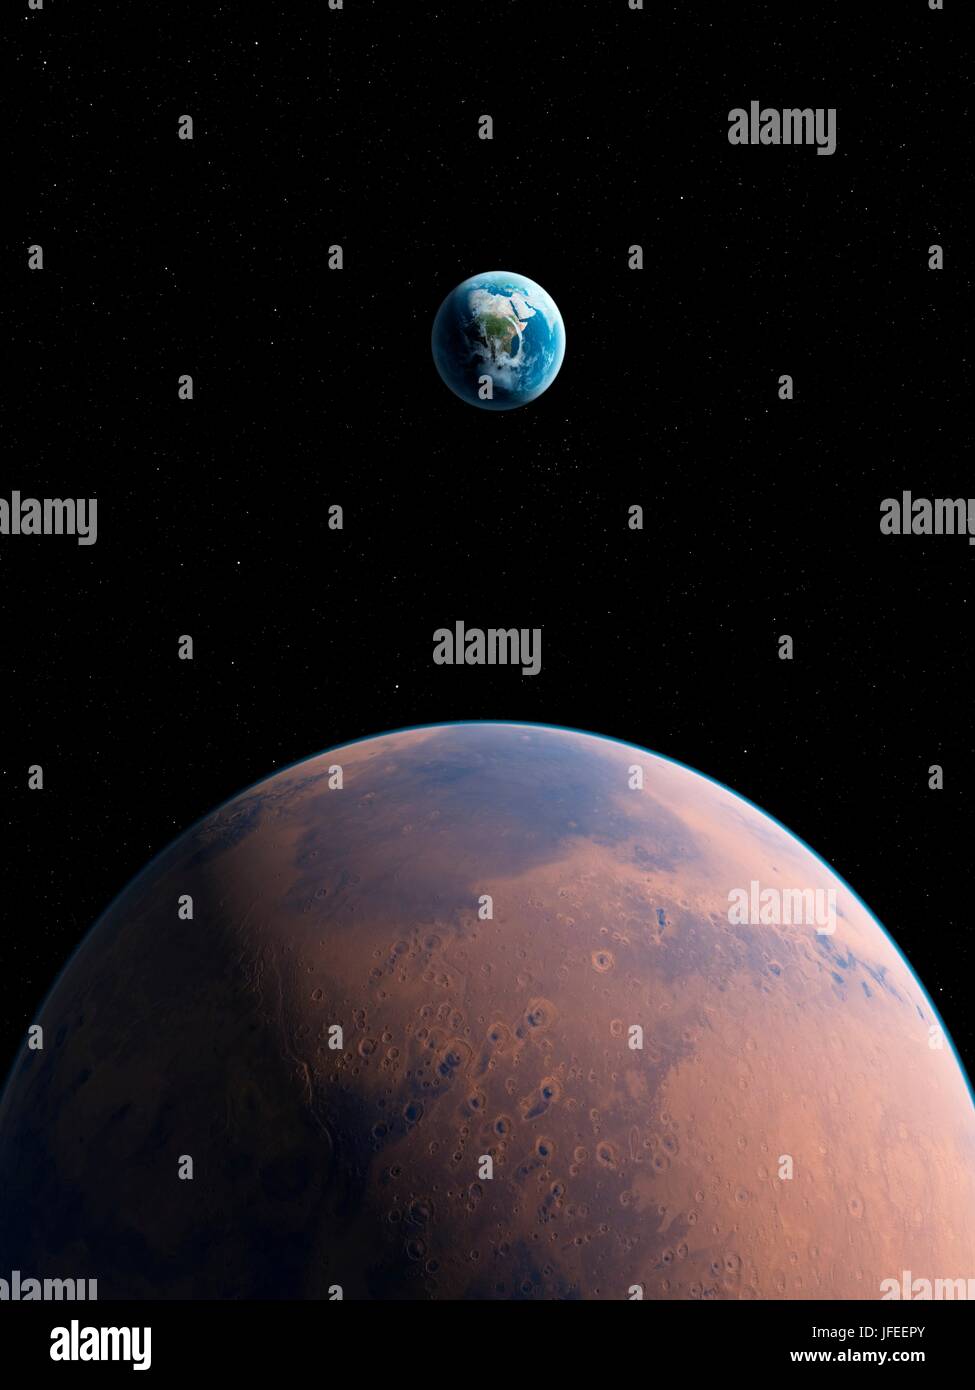 Planet with Earth in distance, illustration. Stock Photo